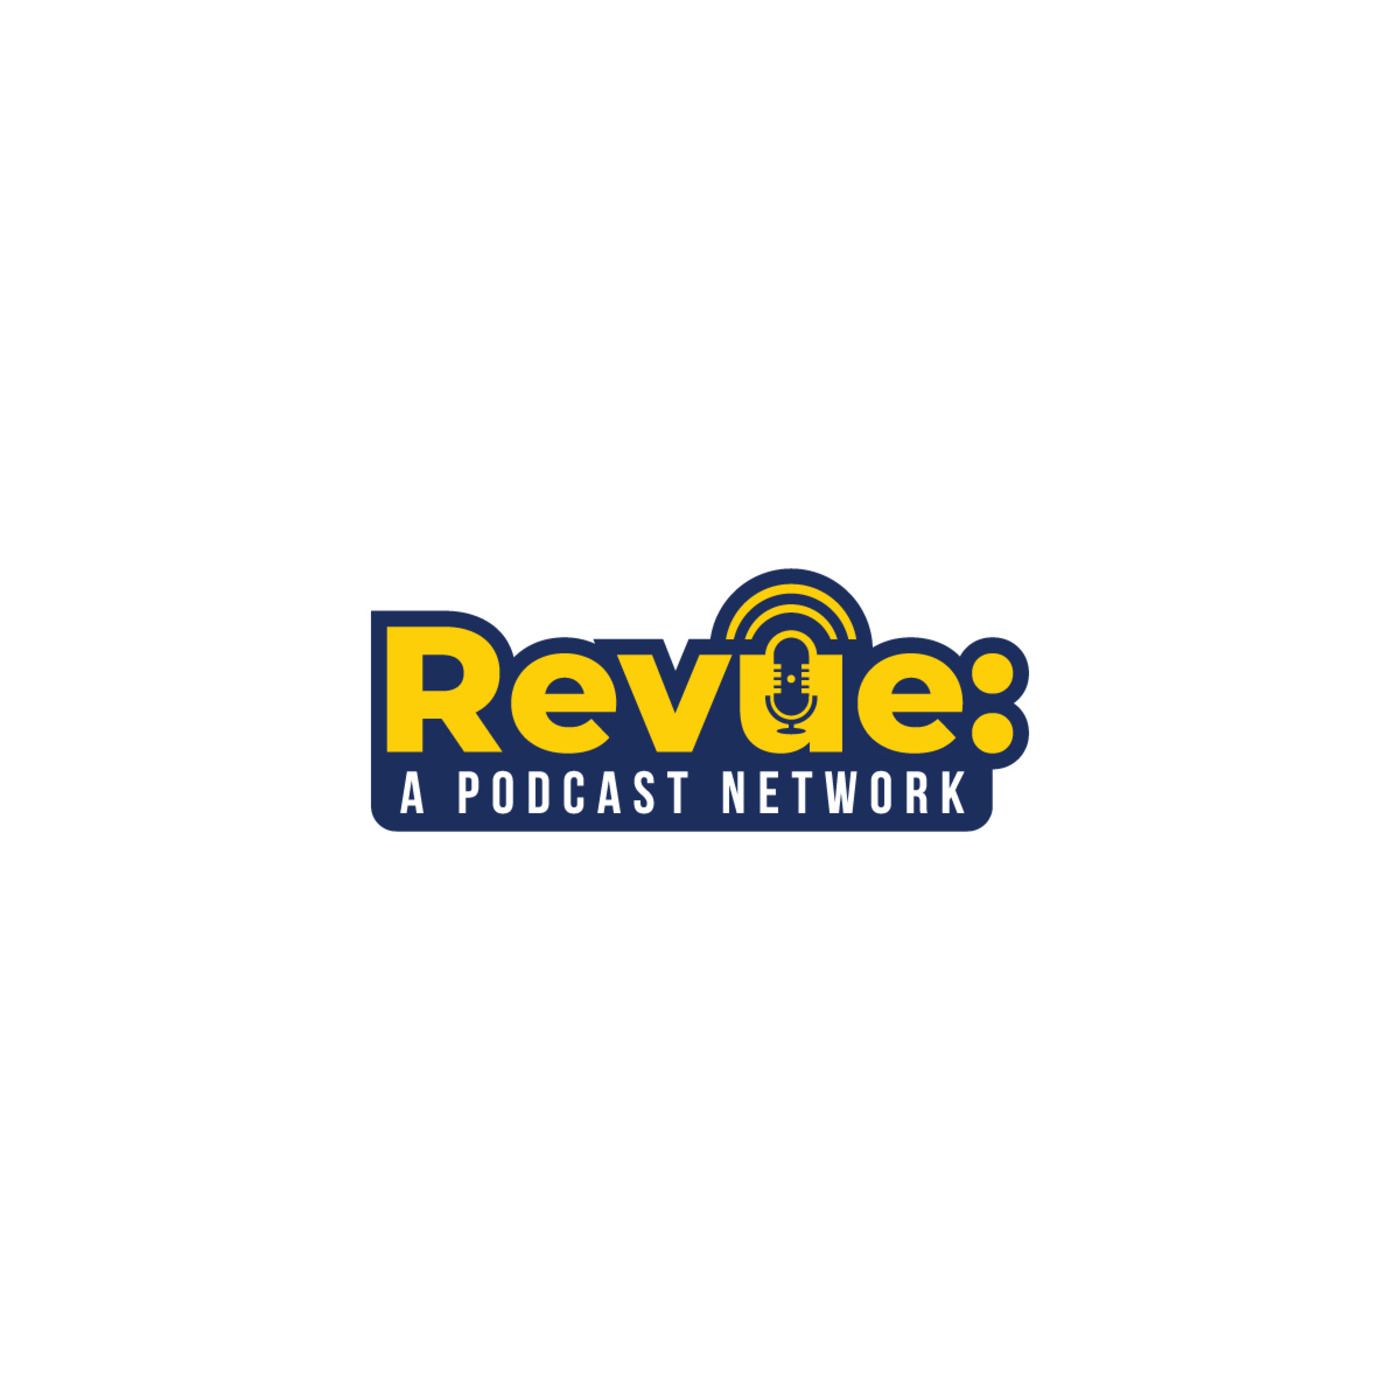 The Revue Podcast Network